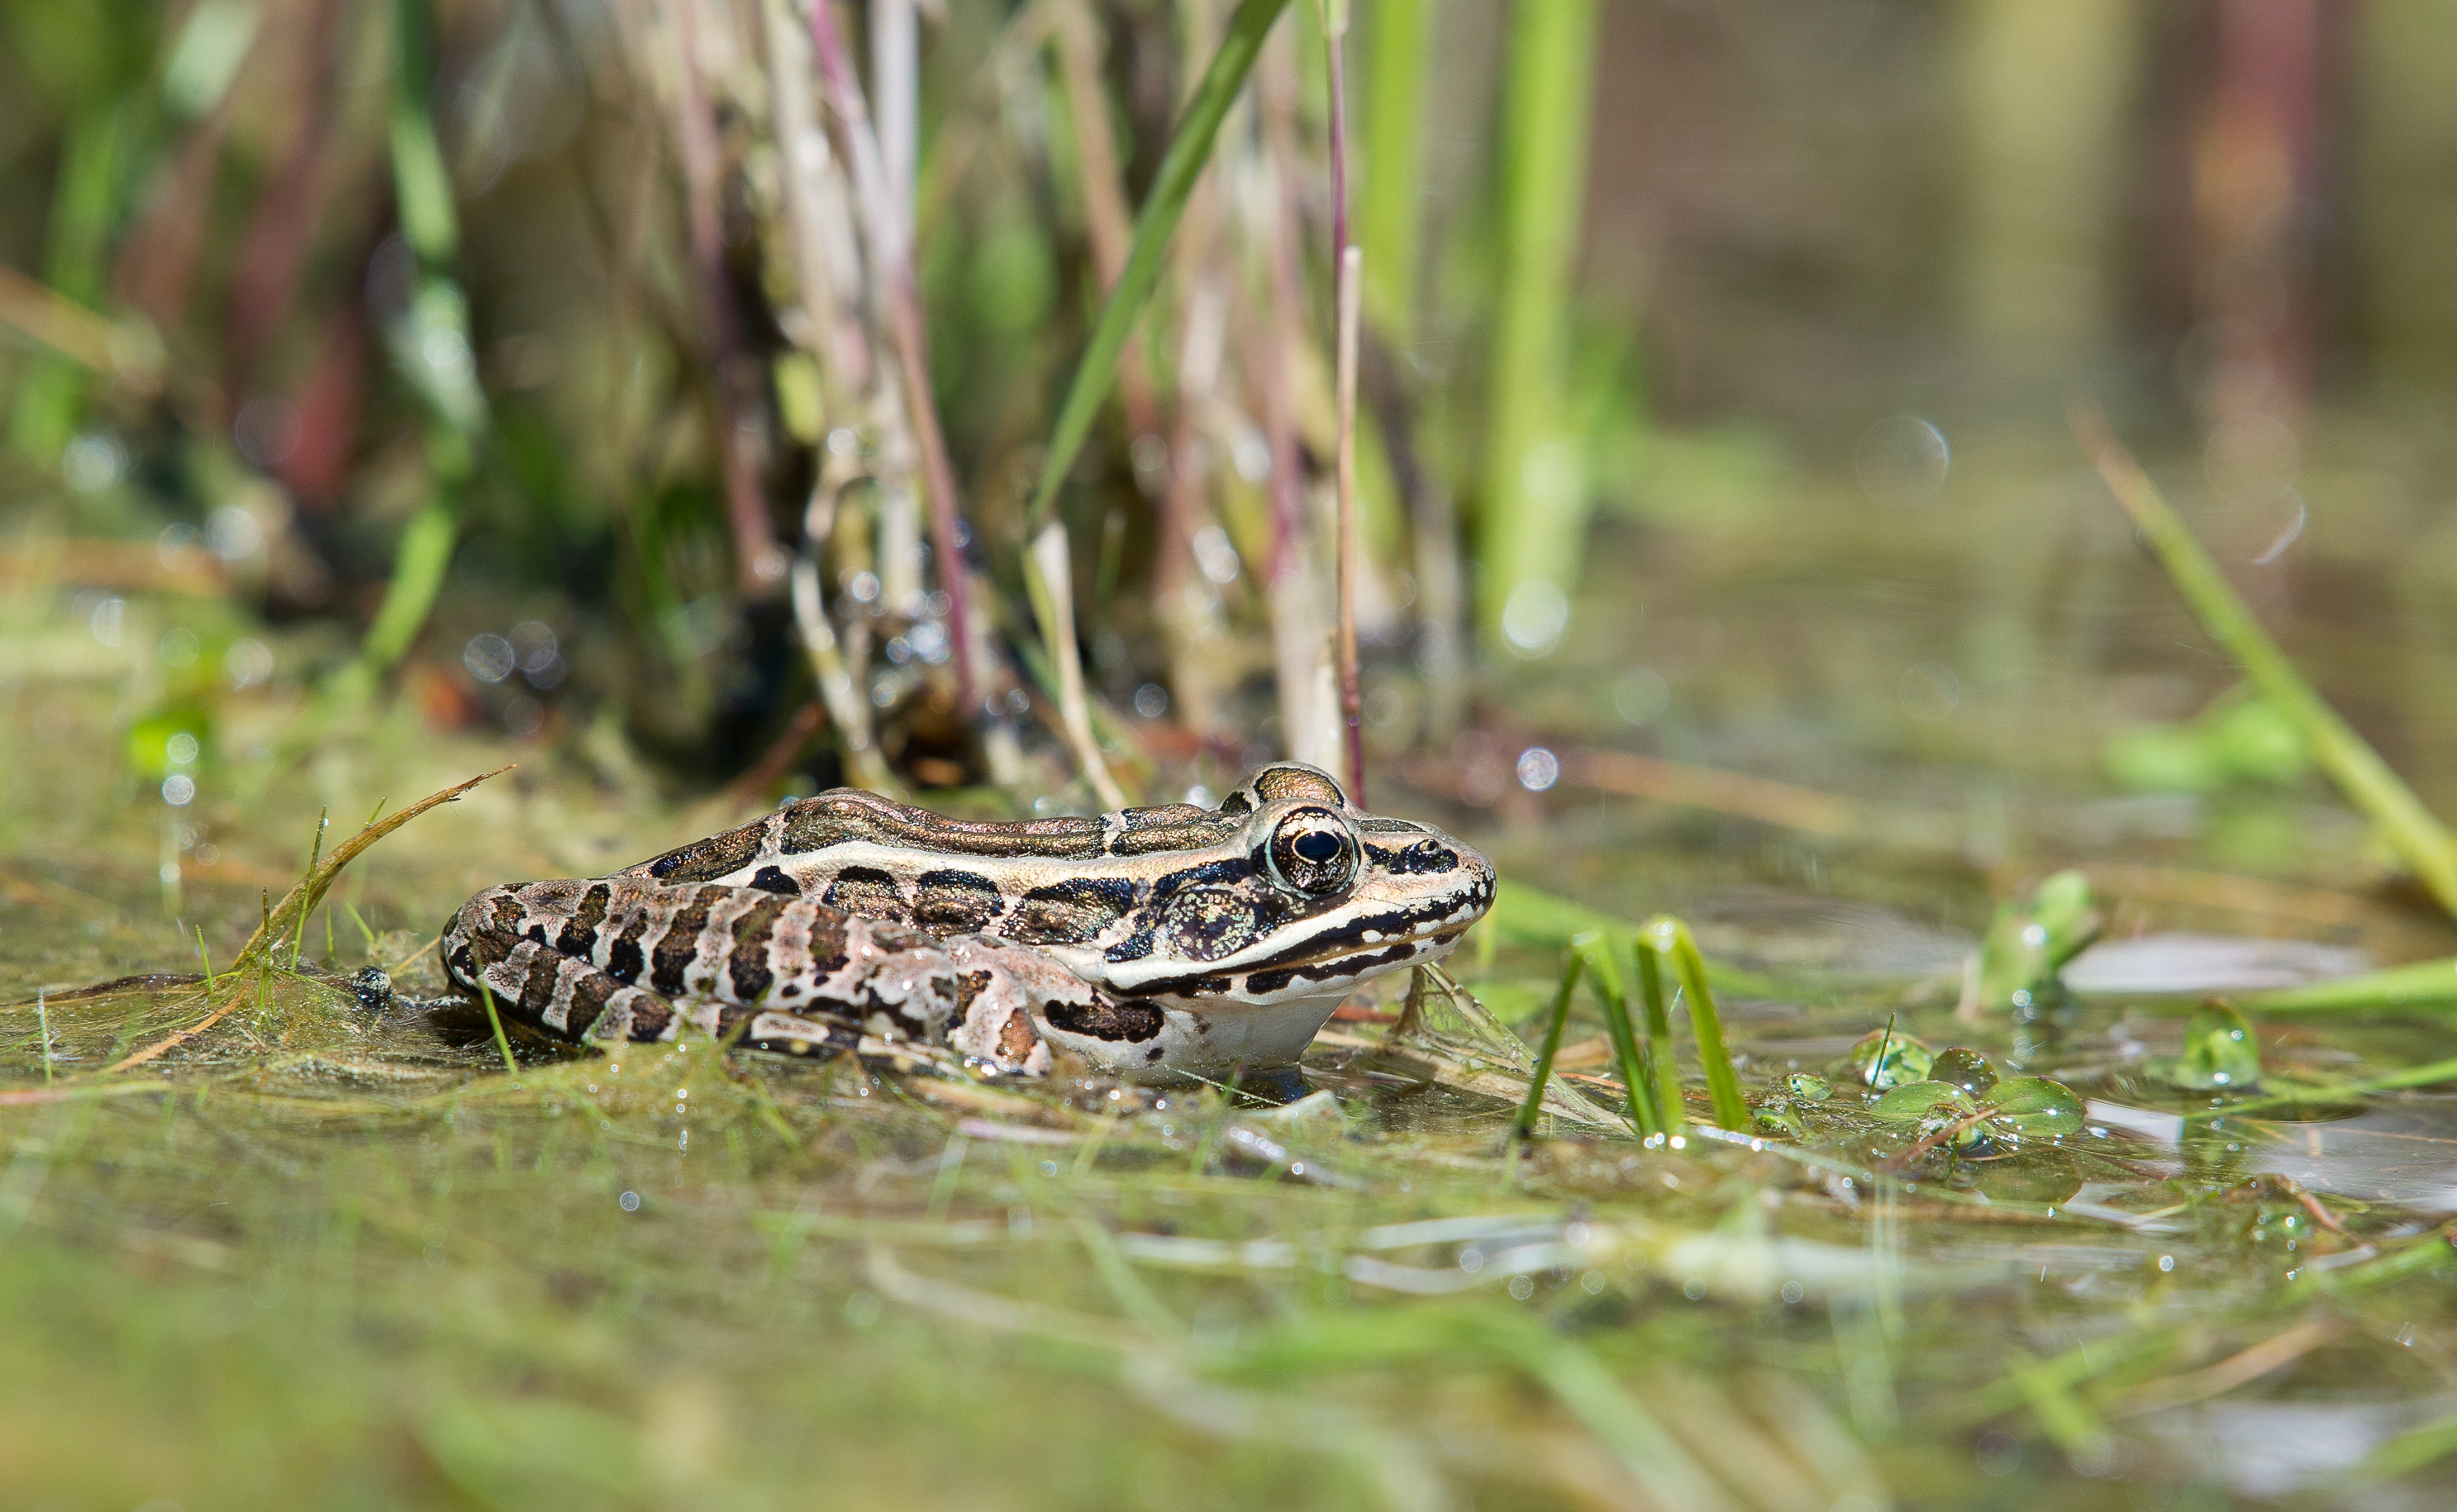 A black-tan-and-white-patterned frog sitting in shallow water on grass